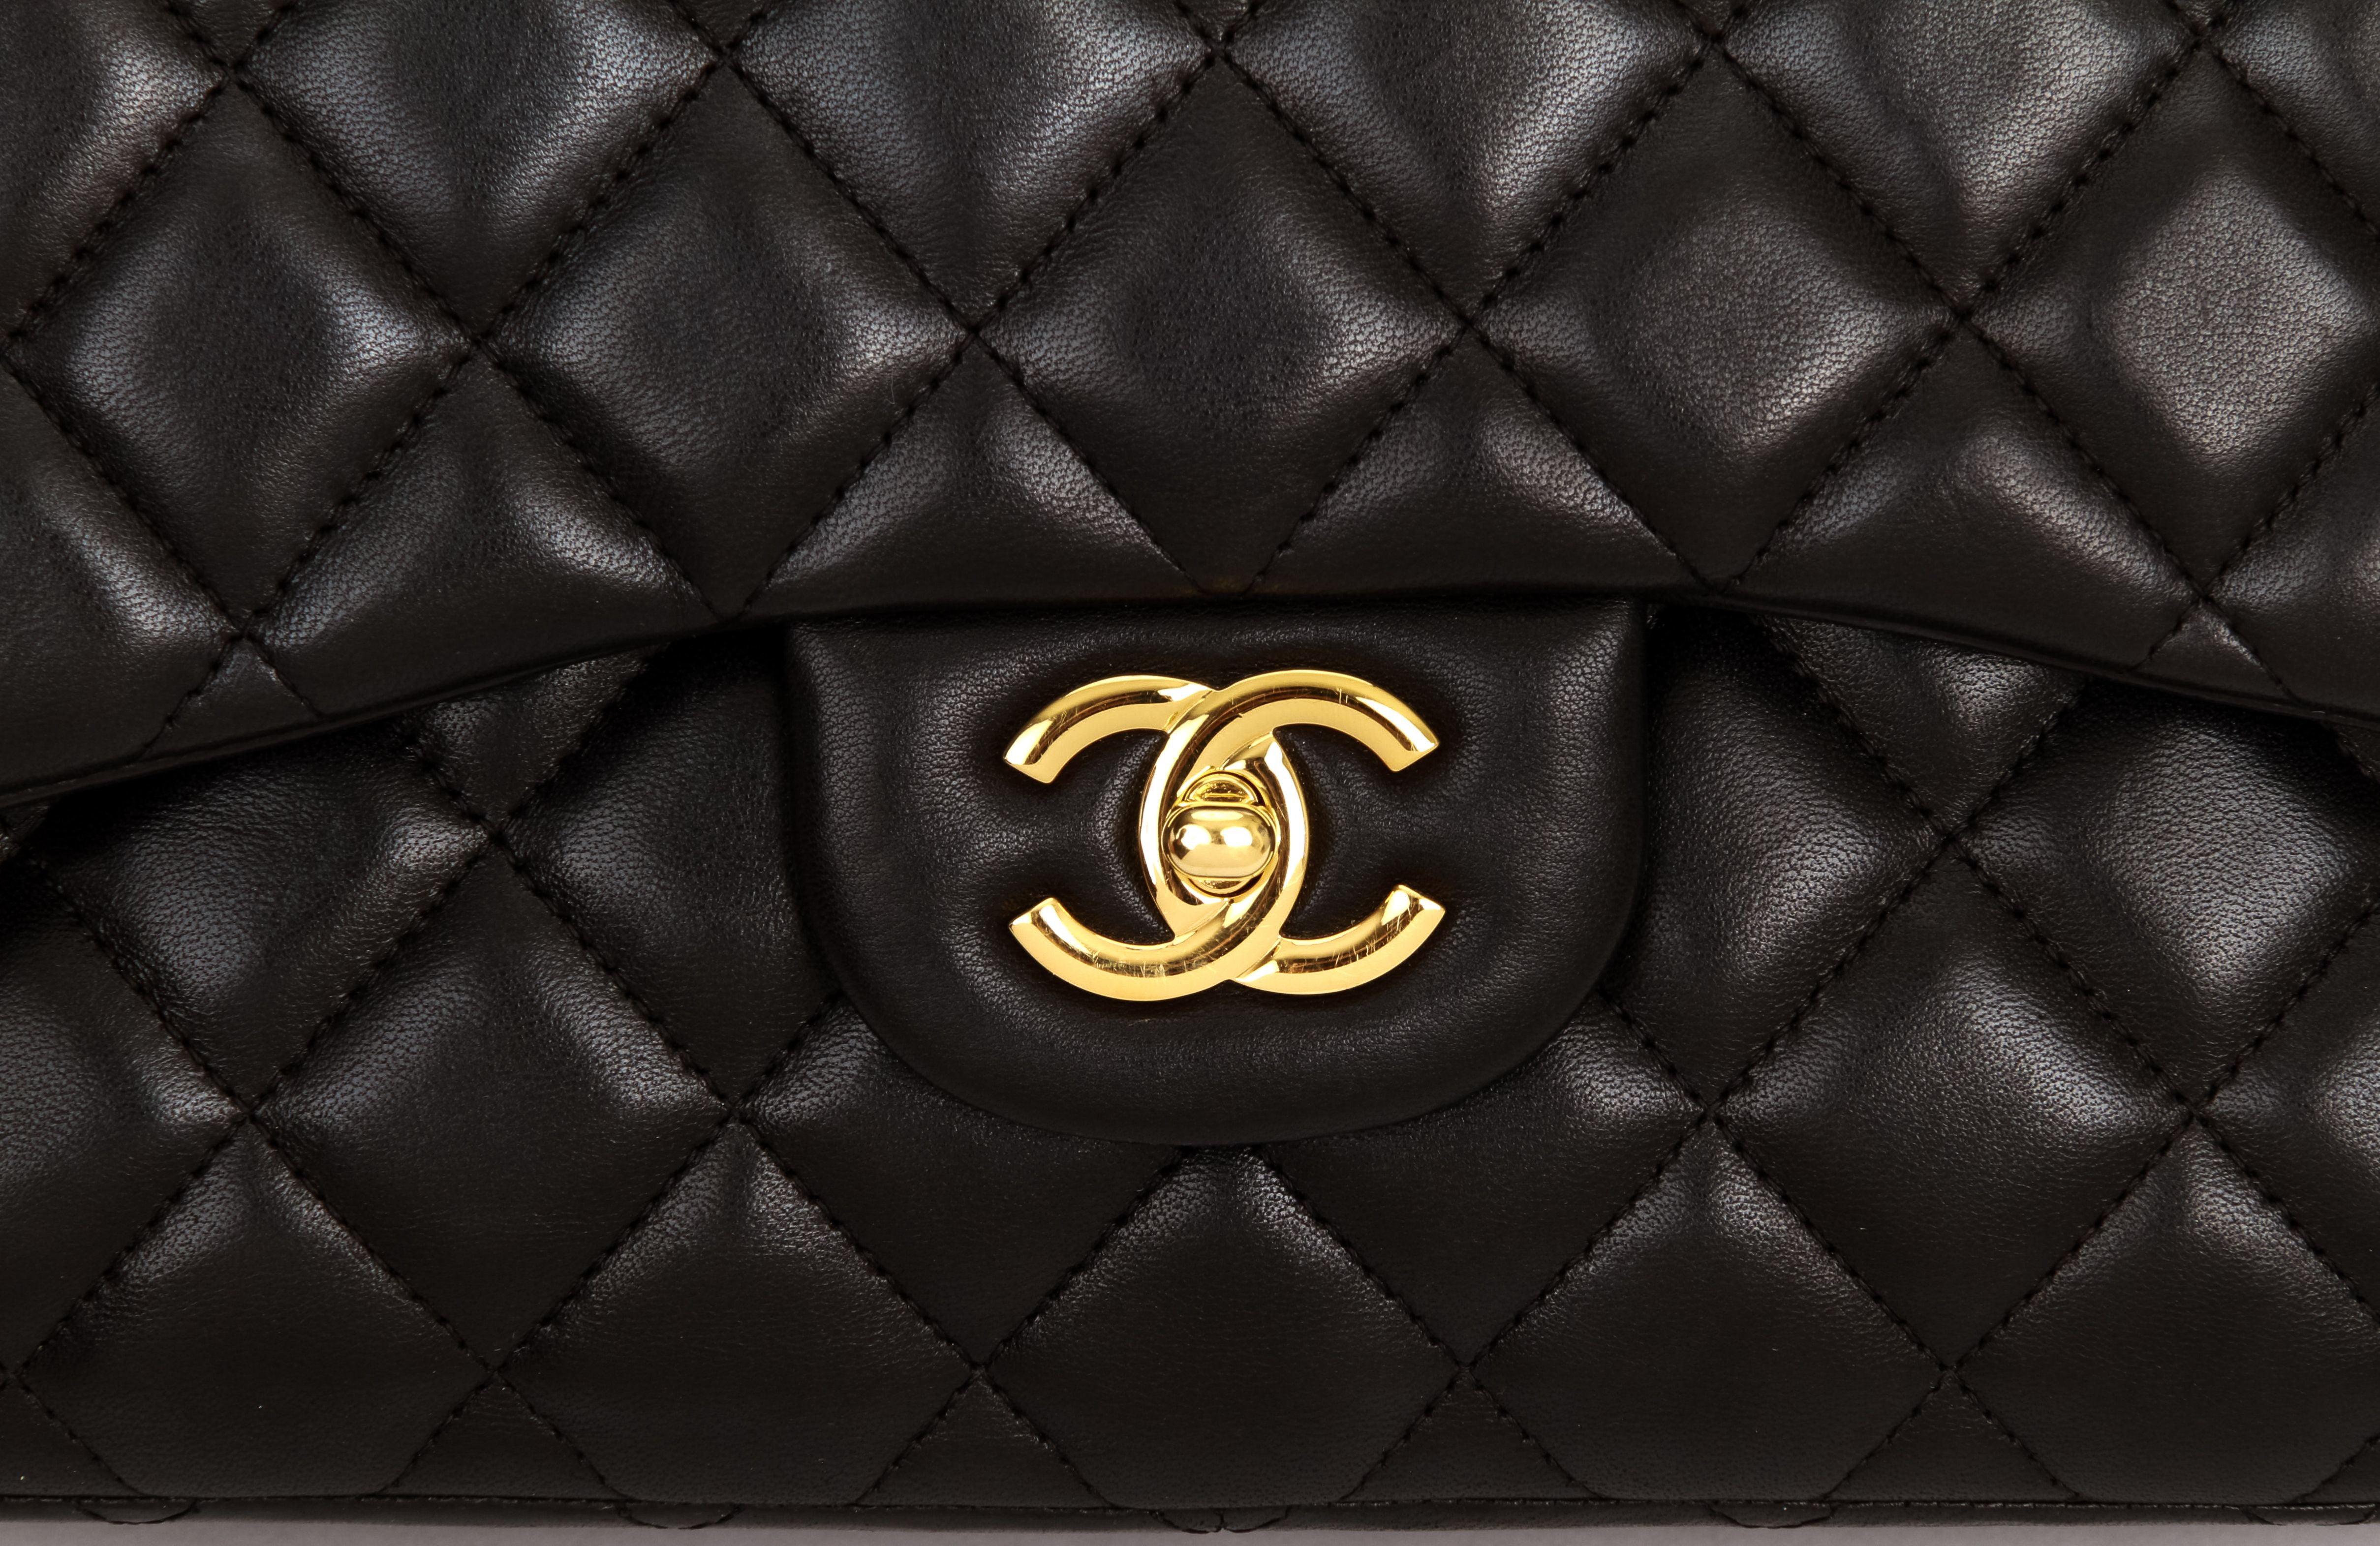 Metallic Gold Chanel - 151 For Sale on 1stDibs  chanel gold metallic bag,  gold metallic chanel bag, metallic gold chanel bag